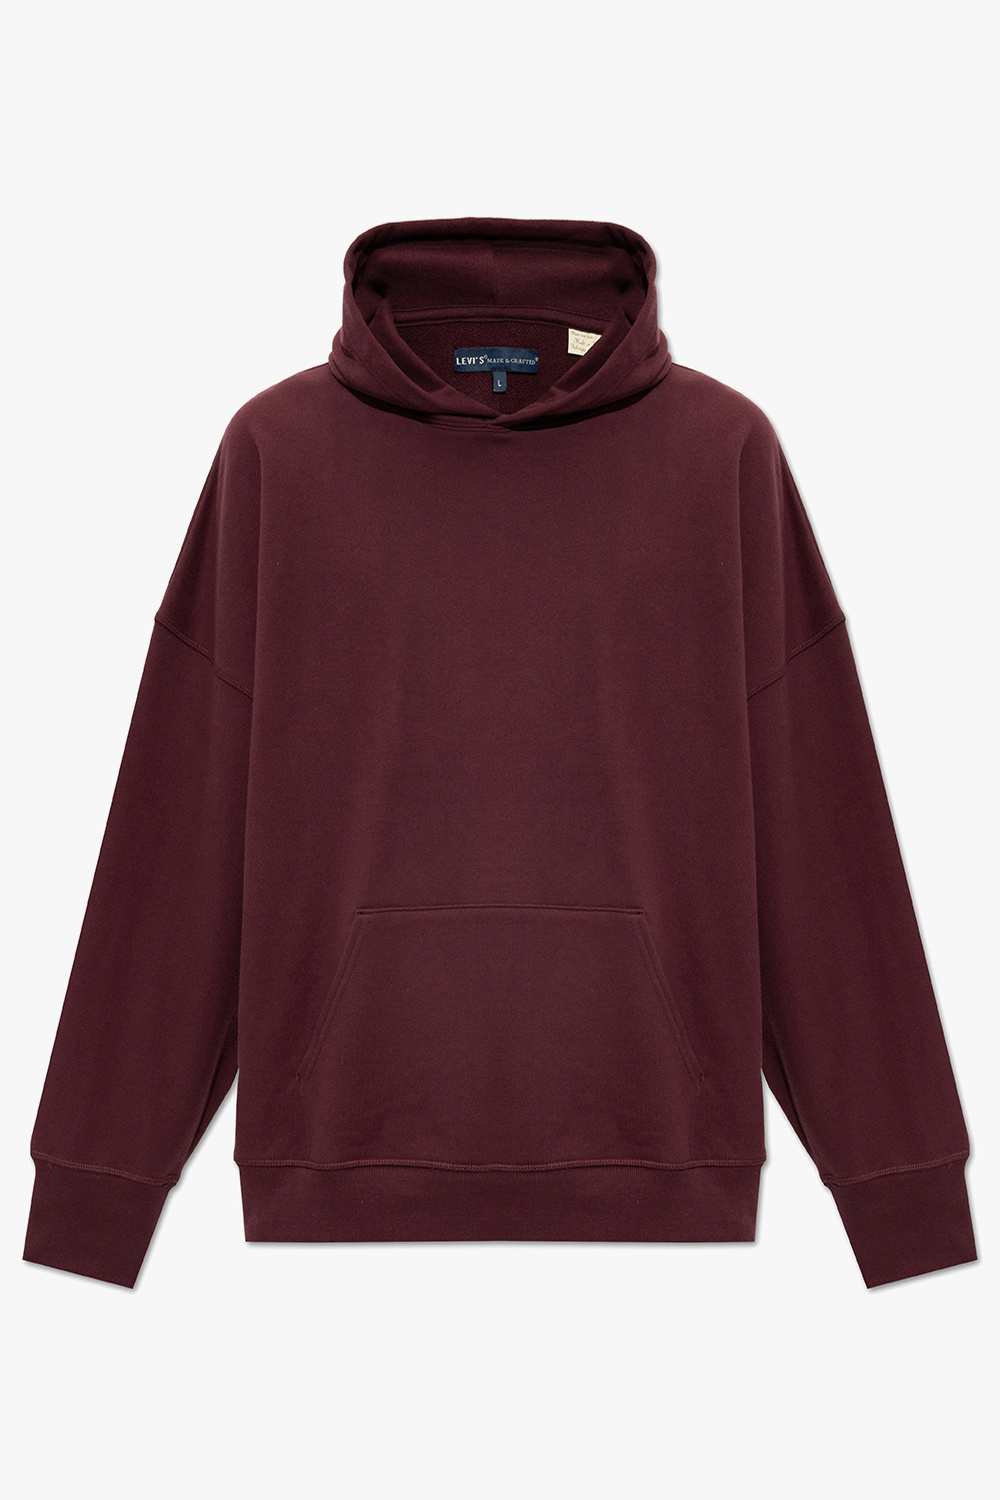 Burgundy The 'Made & Crafted®' collection hoodie Levi's - Vitkac Slovakia